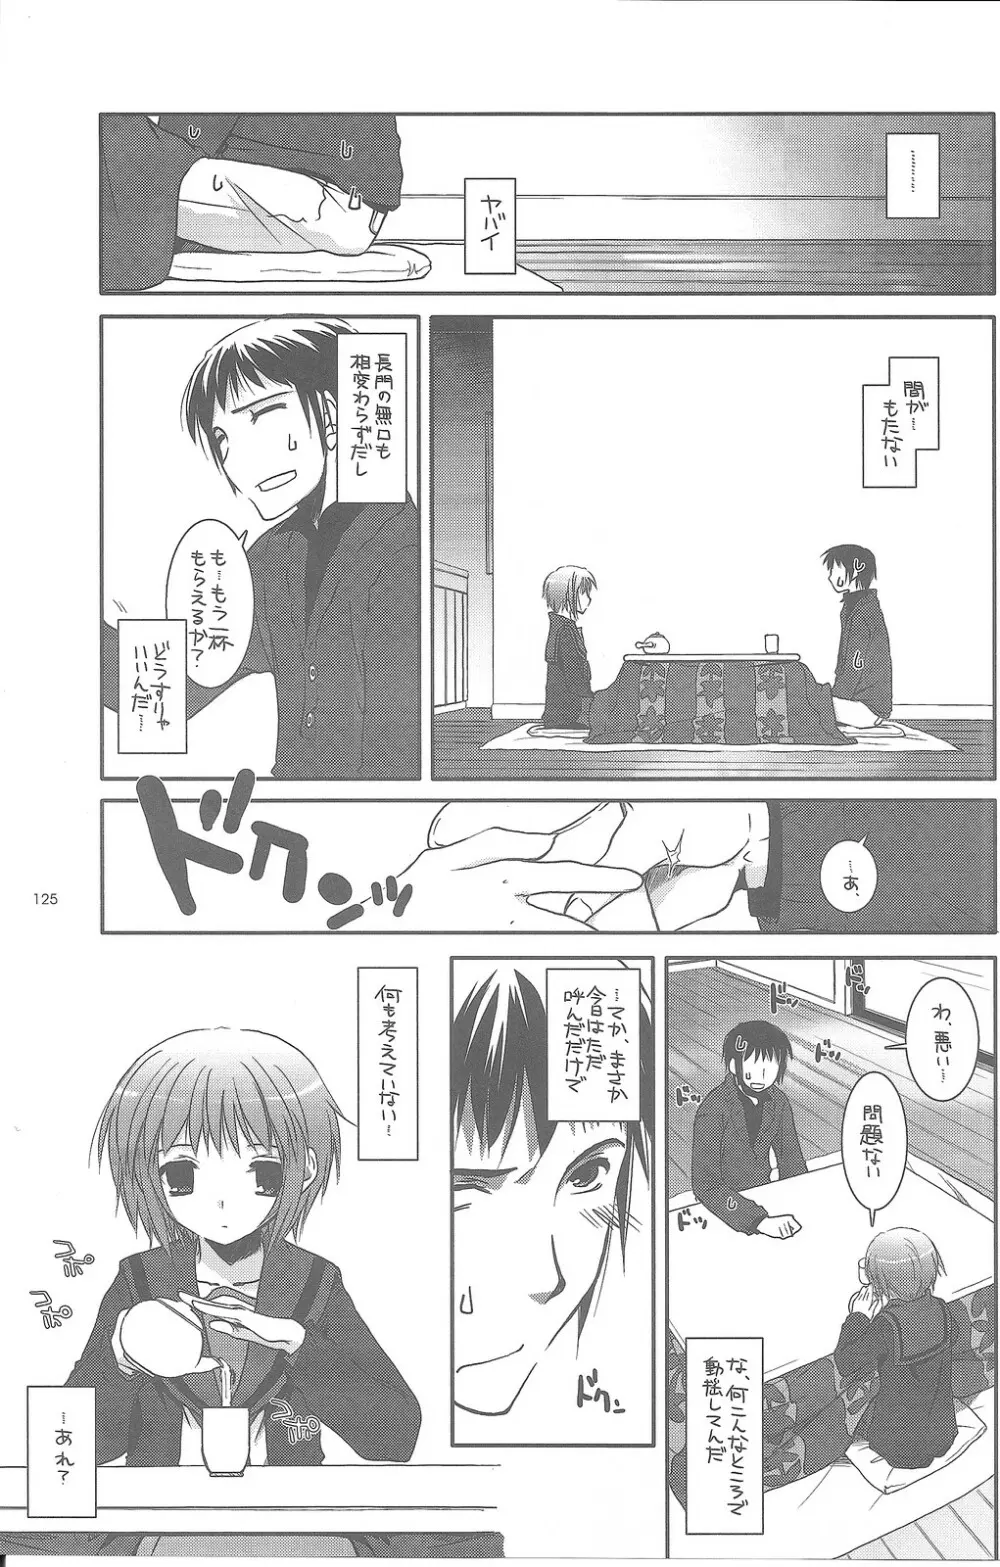 DL-SOS 総集編 - page124